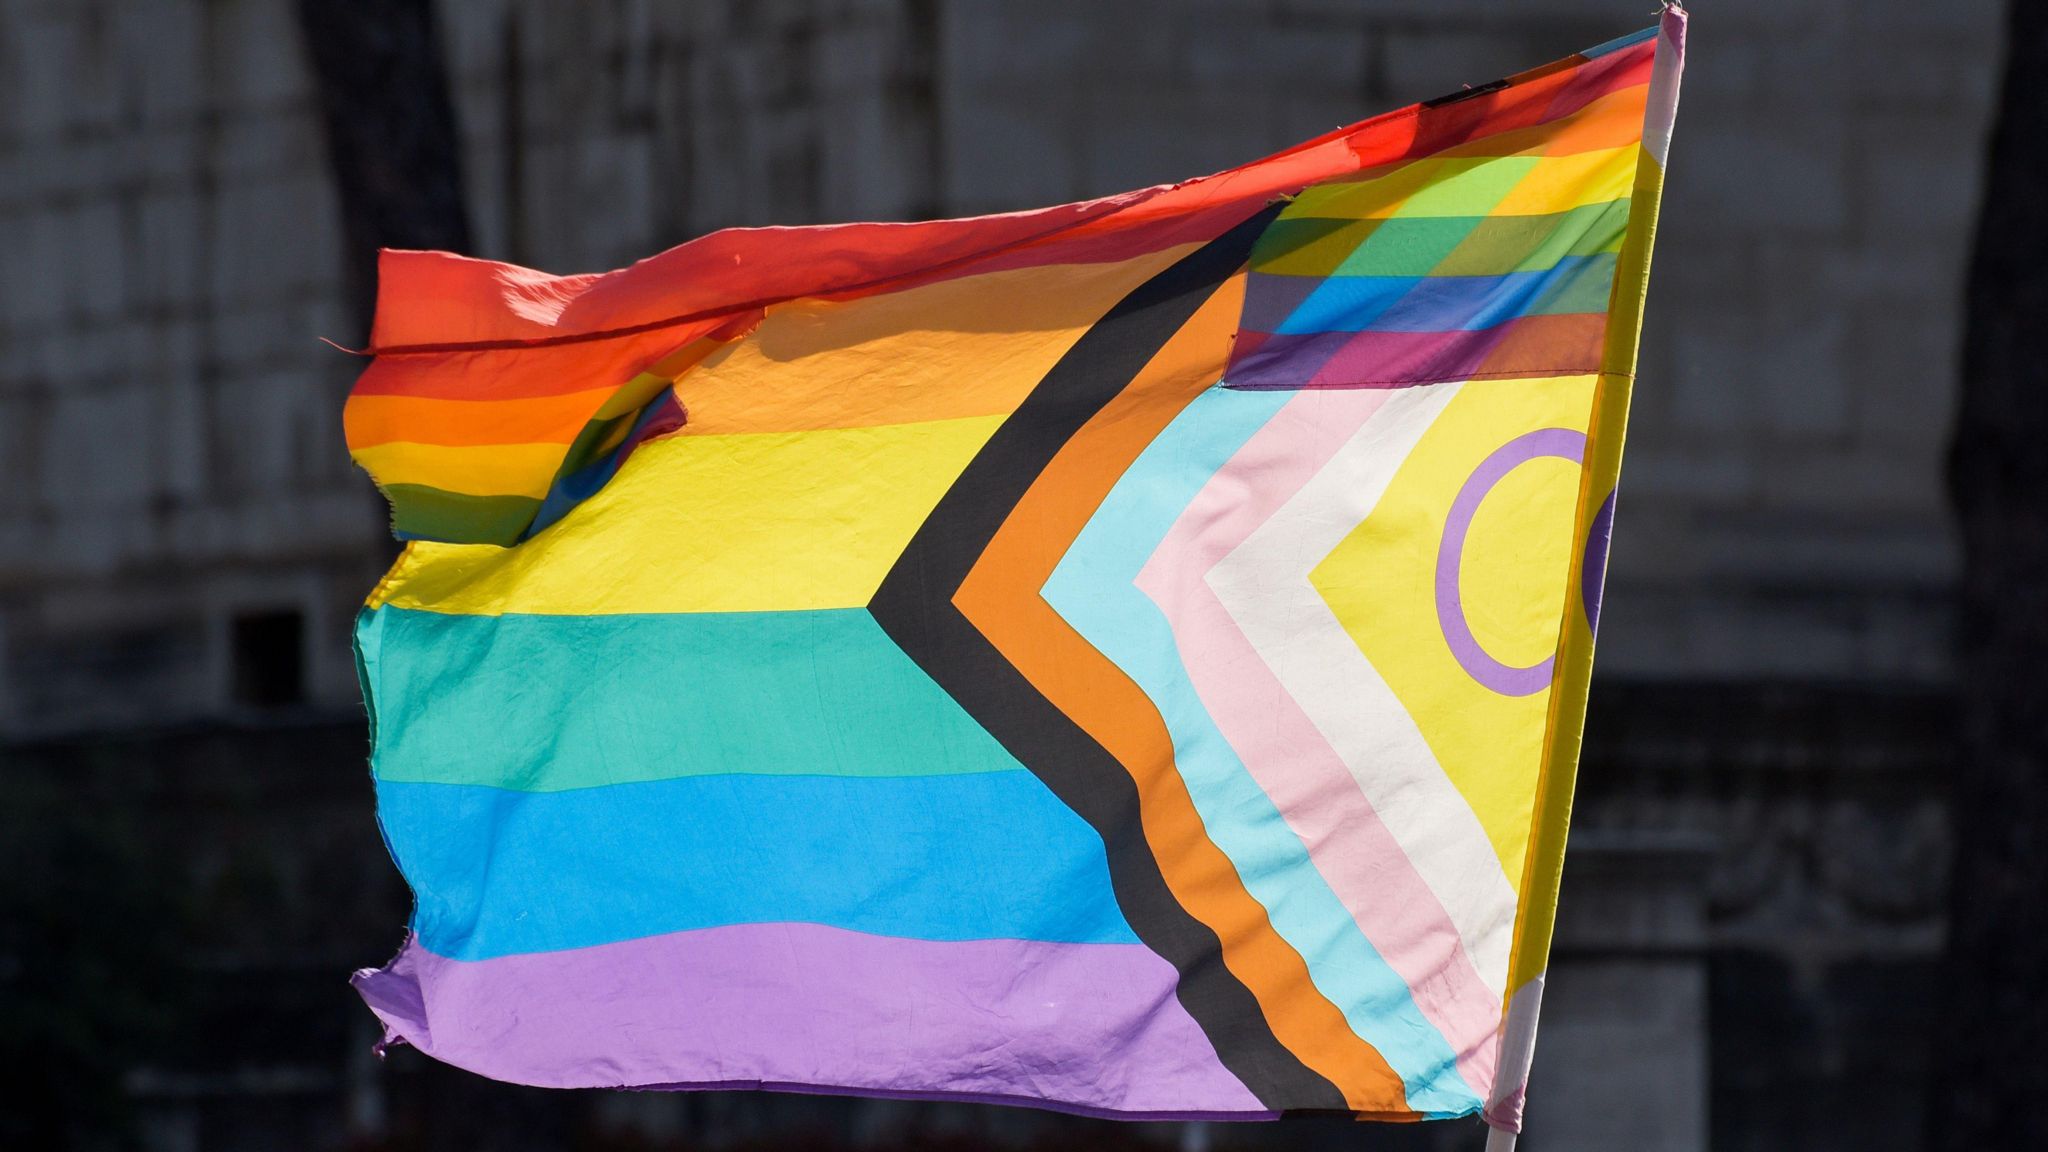 Image of the progress pride flag. It has rainbow stripes and a triangle on the side.